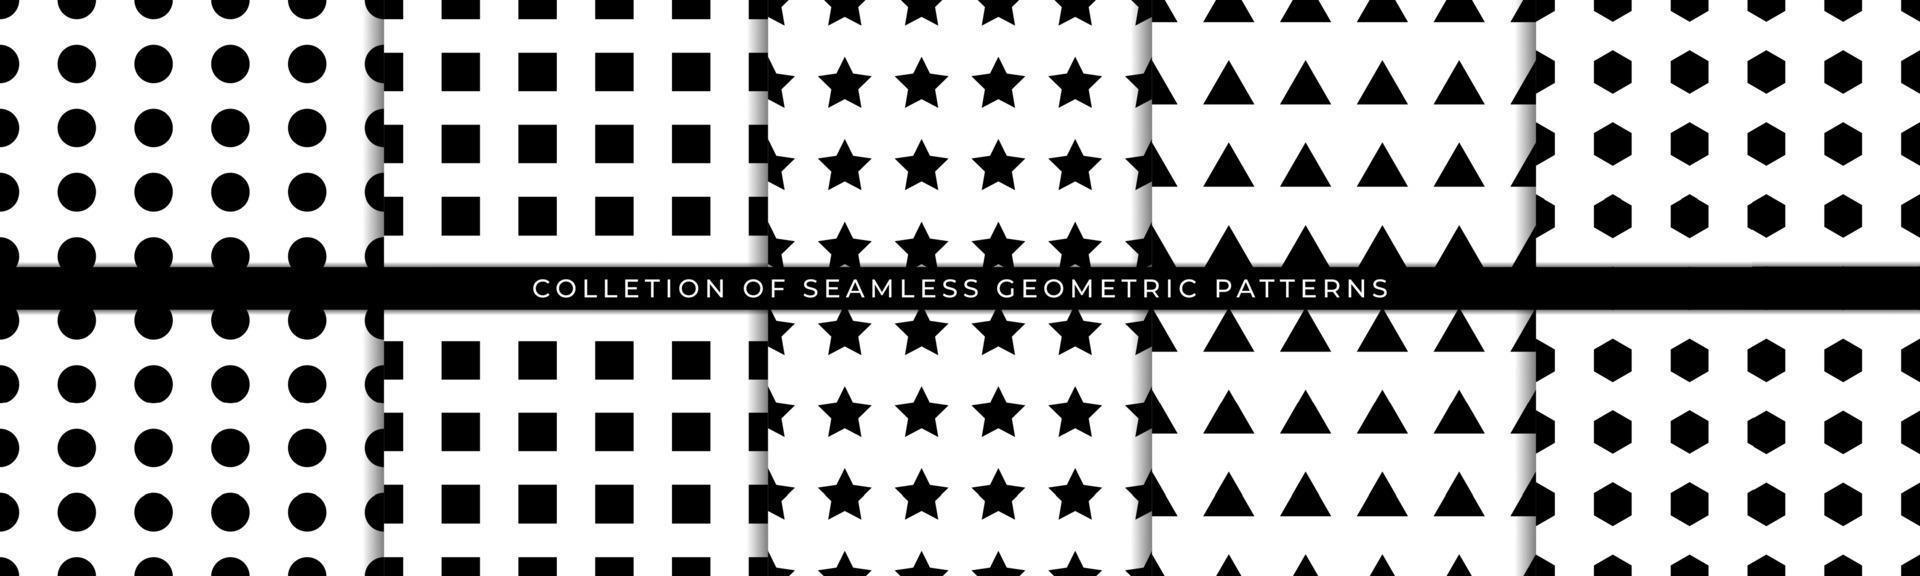 Set of Geometric seamless patterns. Seamless geometric pattern isolated on white vector